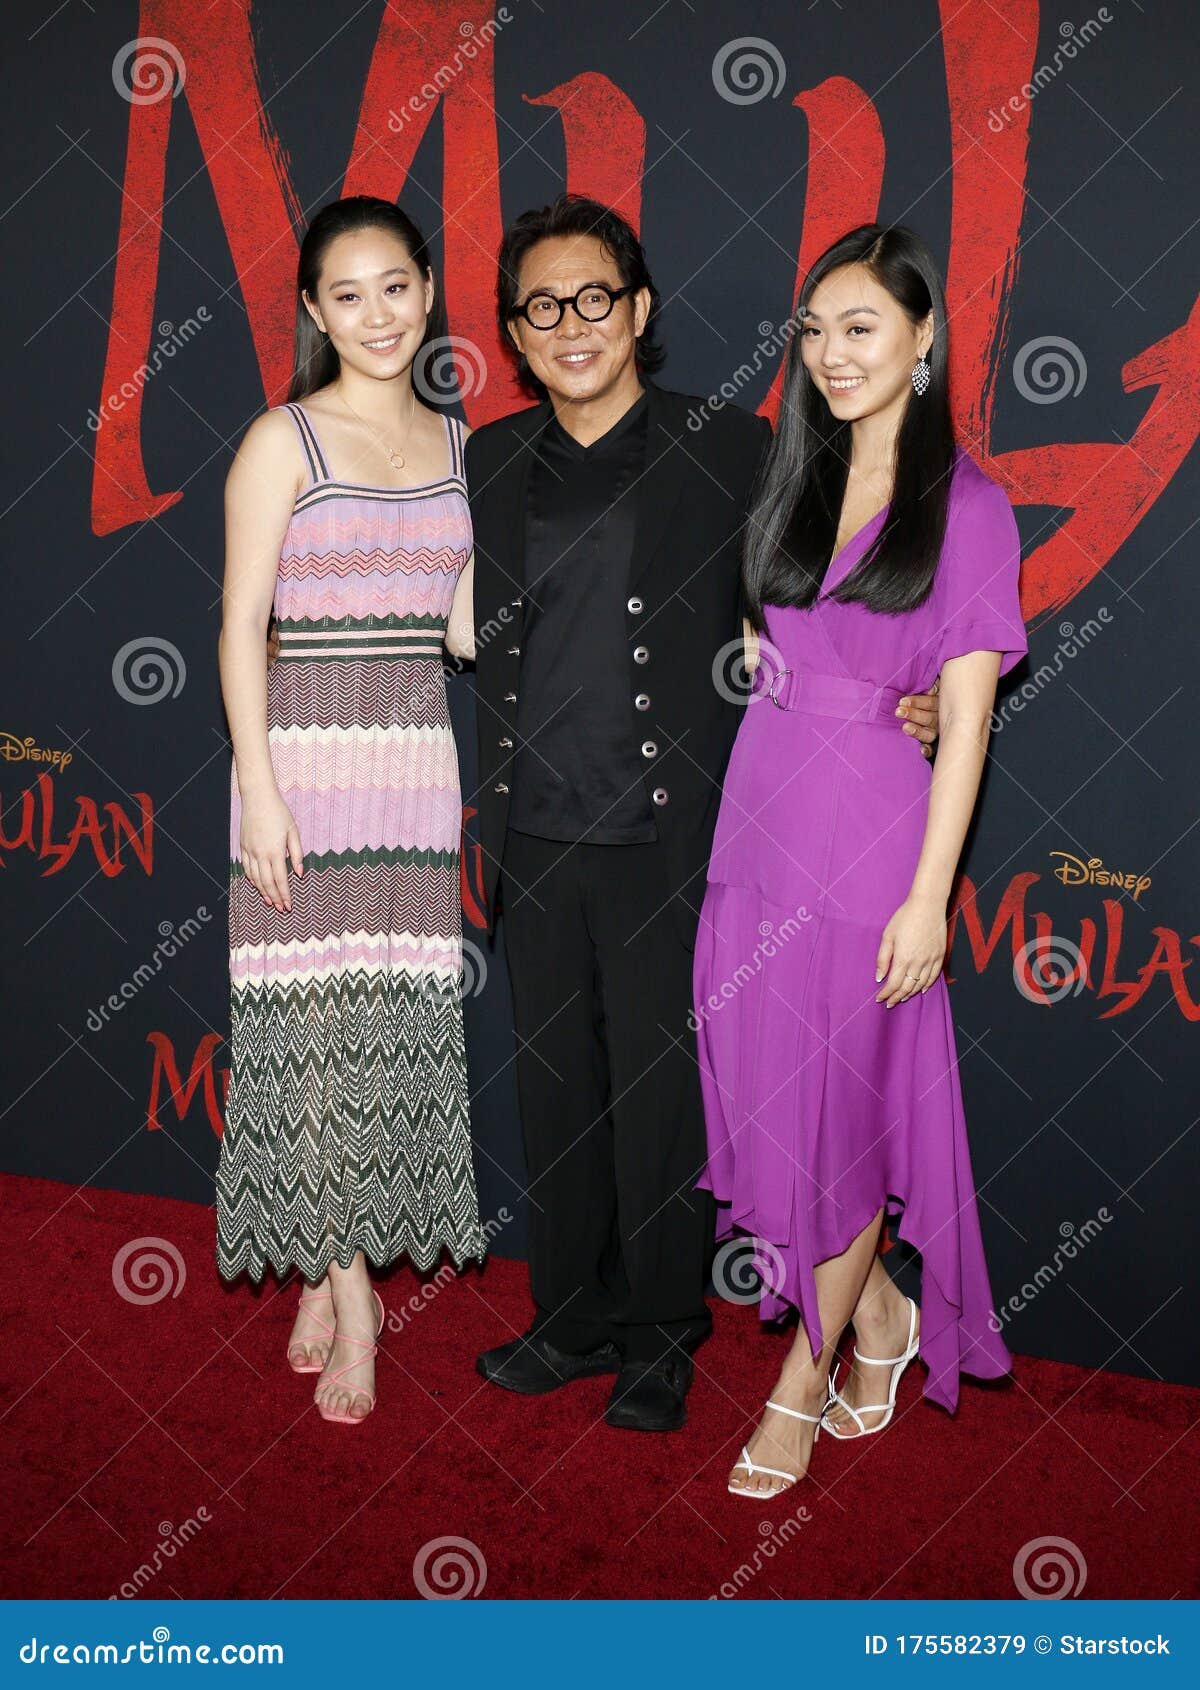 Jet Li’s daughter Jane Li on stepping out as a debutante at Le Bal, and ...